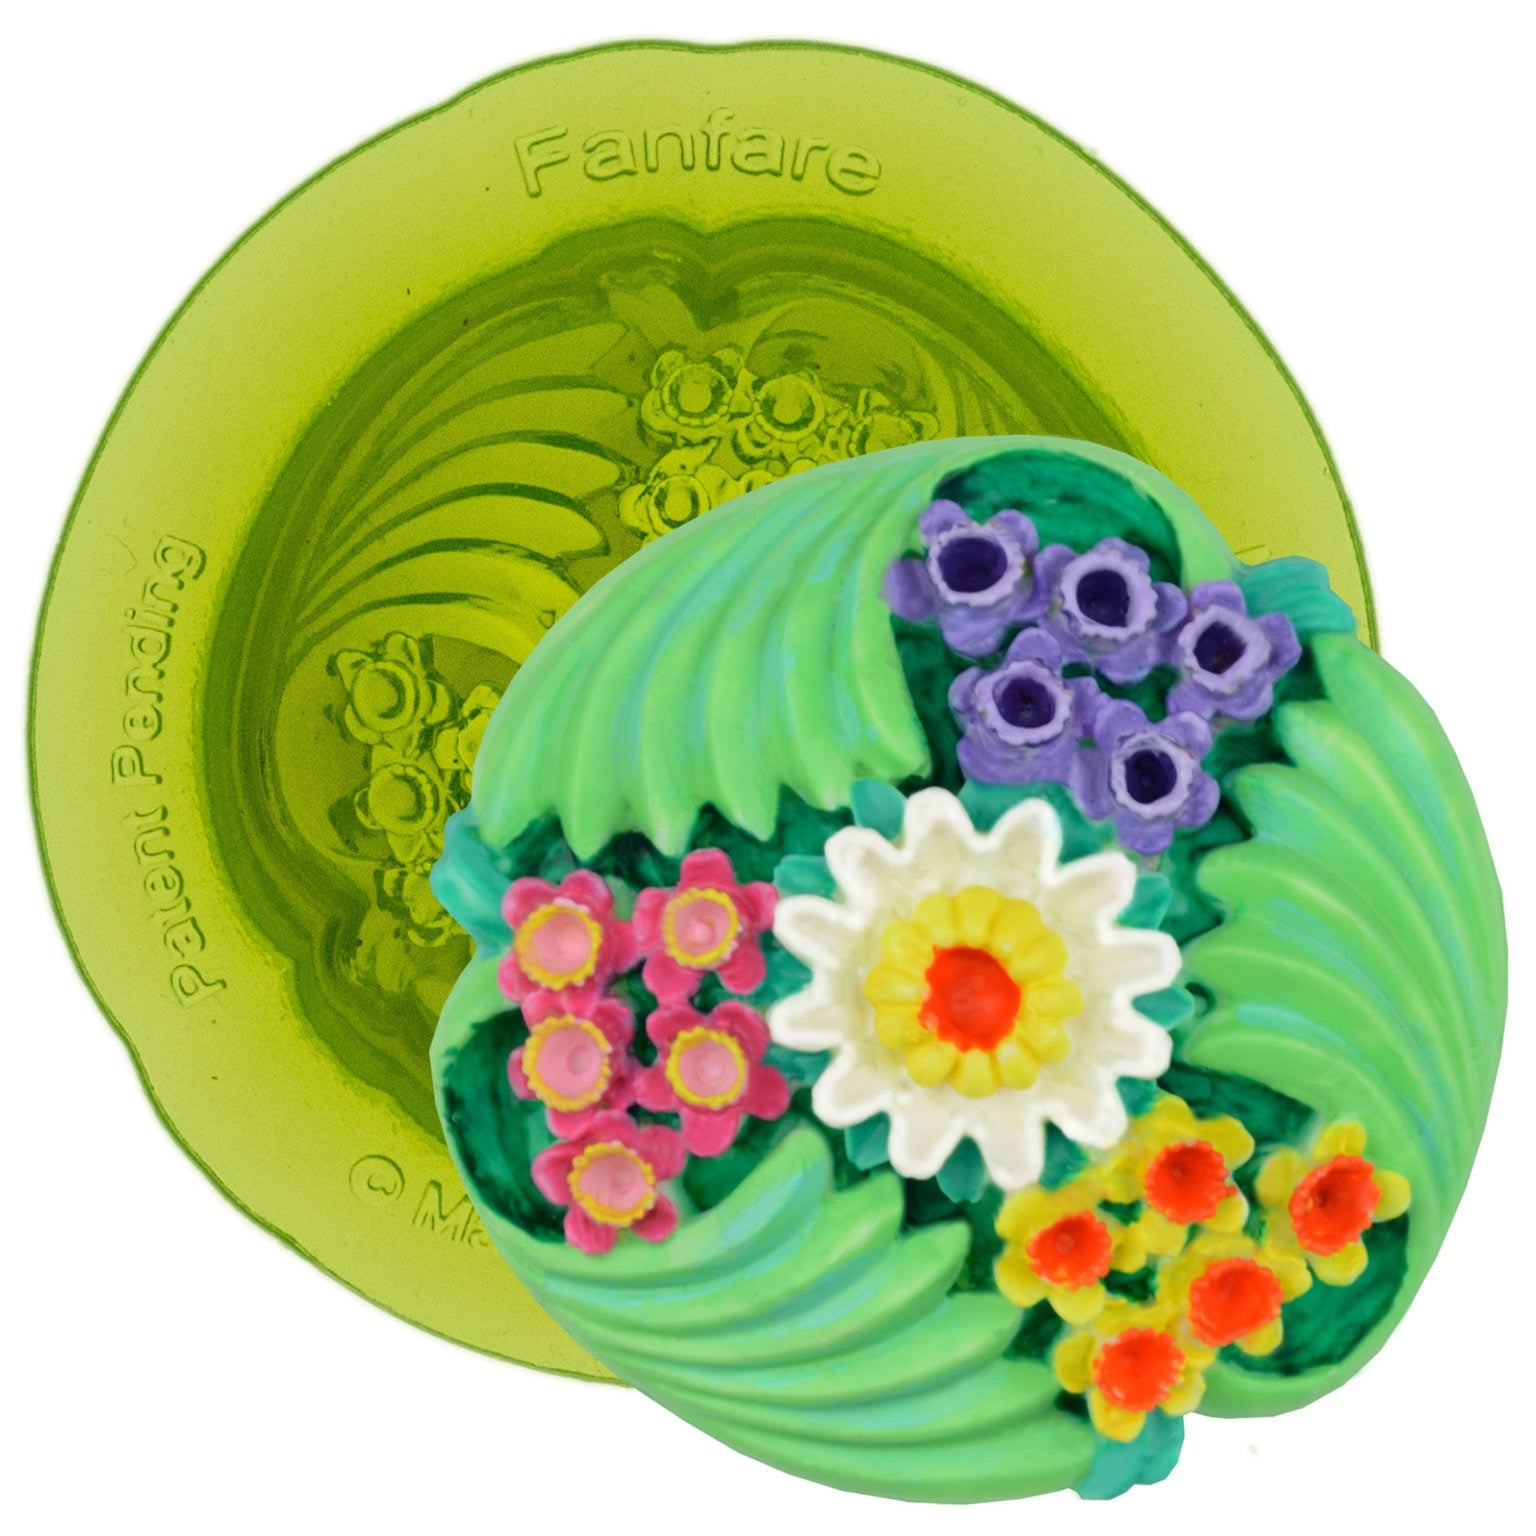 Fanfare Medallion Silicone Fondant Mold by Marvelous Molds